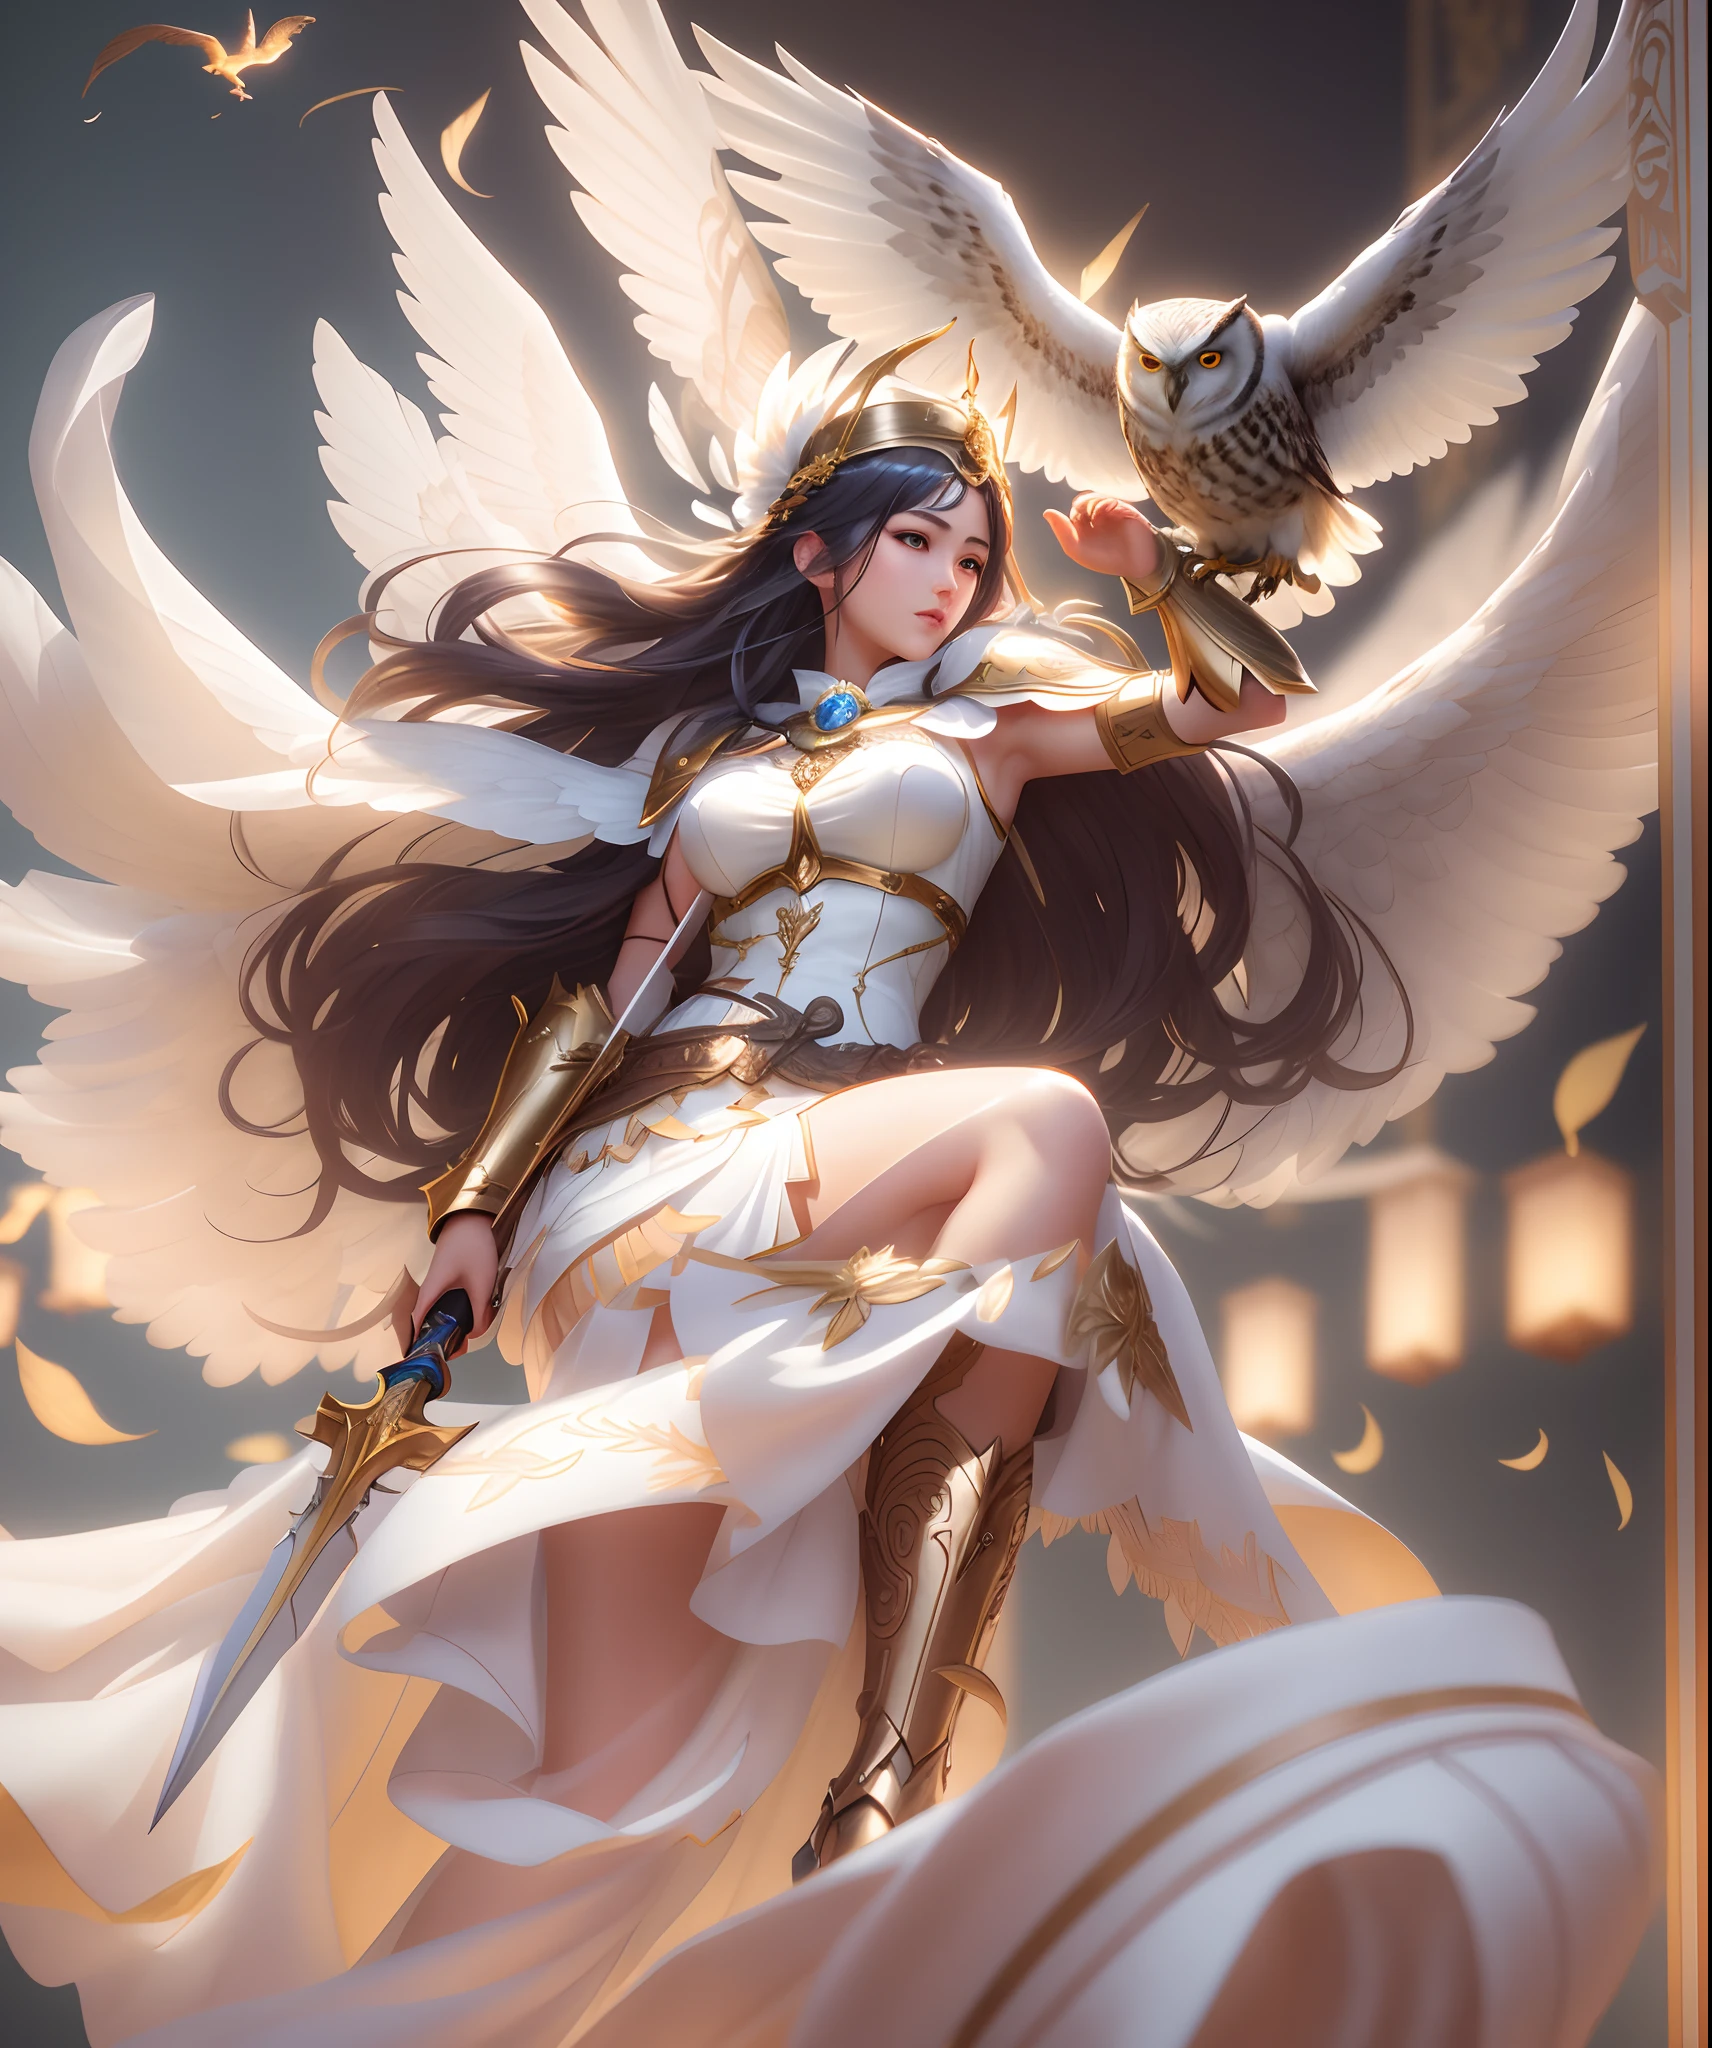 a woman in a white dress holding a sword and a bird, wlop and artgerm, by Yang J, artgerm and ruan jia, wlop art, anime goddess, extremely detailed artgerm, artgerm and wlop, ruan jia and artgerm, aly fell and artgerm, the god athena, greek goddess athena, fullbody portrait of realistic athena goddess with an owl flying above her head, highly detailed, ultra detail, studio shoot, cinematic angle, 85mm prime lens, macro lens, iso 100, f/4, canon eos, canon 5d, --quality 100, --s 5000, --stylise 1250, vibrant details, hyperrealistic, octane render, 8k, best quality